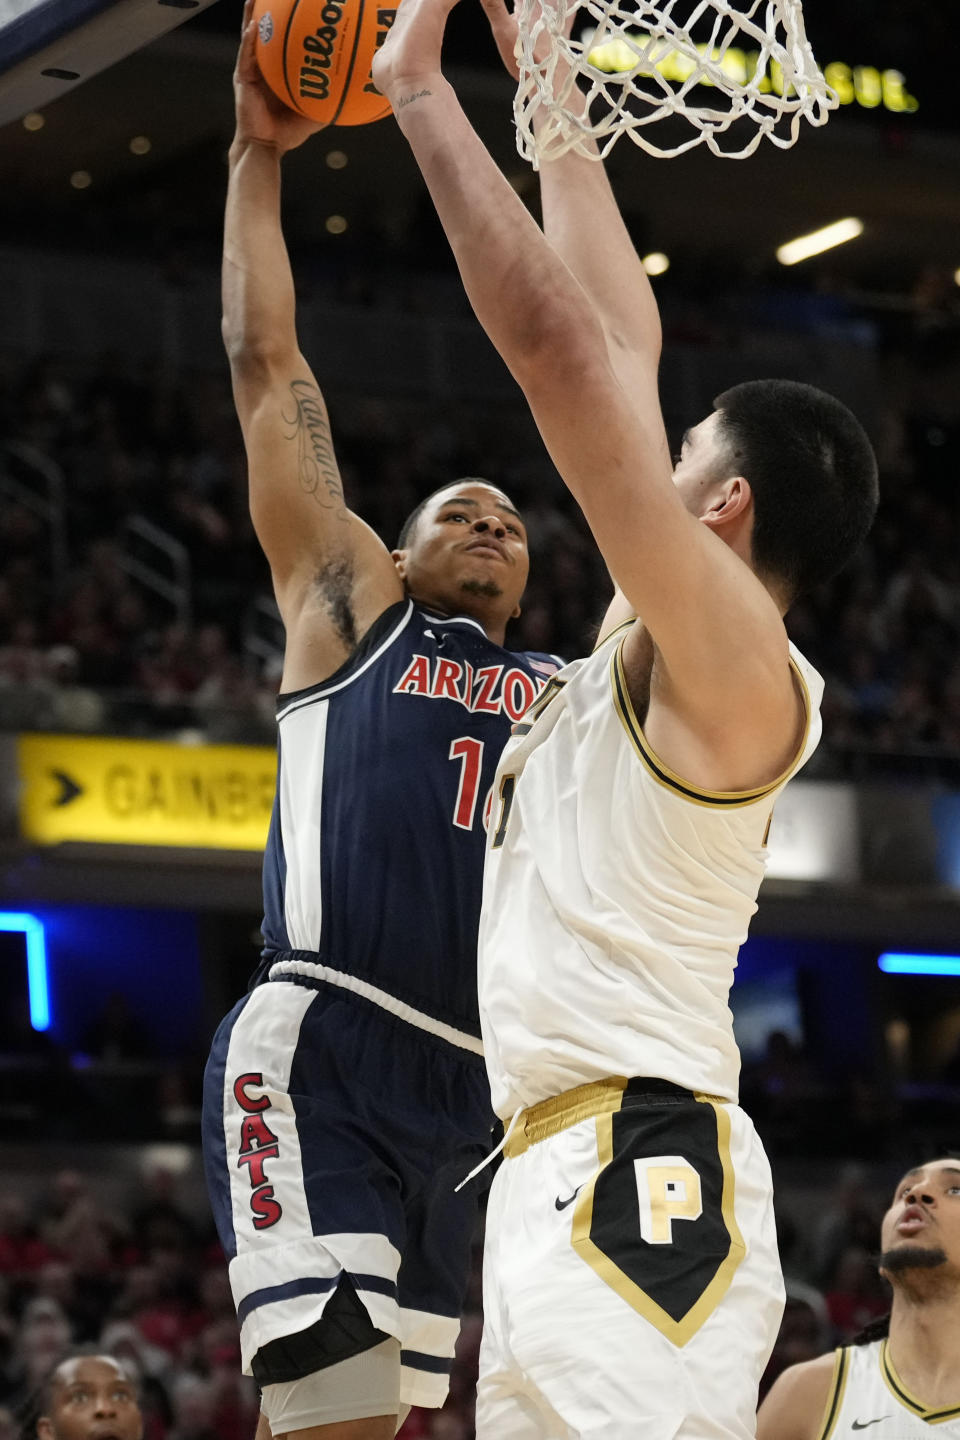 Arizona forward Keshad Johnson, left, dunks in front of Purdue center Zach Edey in the first half of an NCAA college basketball game in Indianapolis, Saturday, Dec. 16, 2023. (AP Photo/AJ Mast)